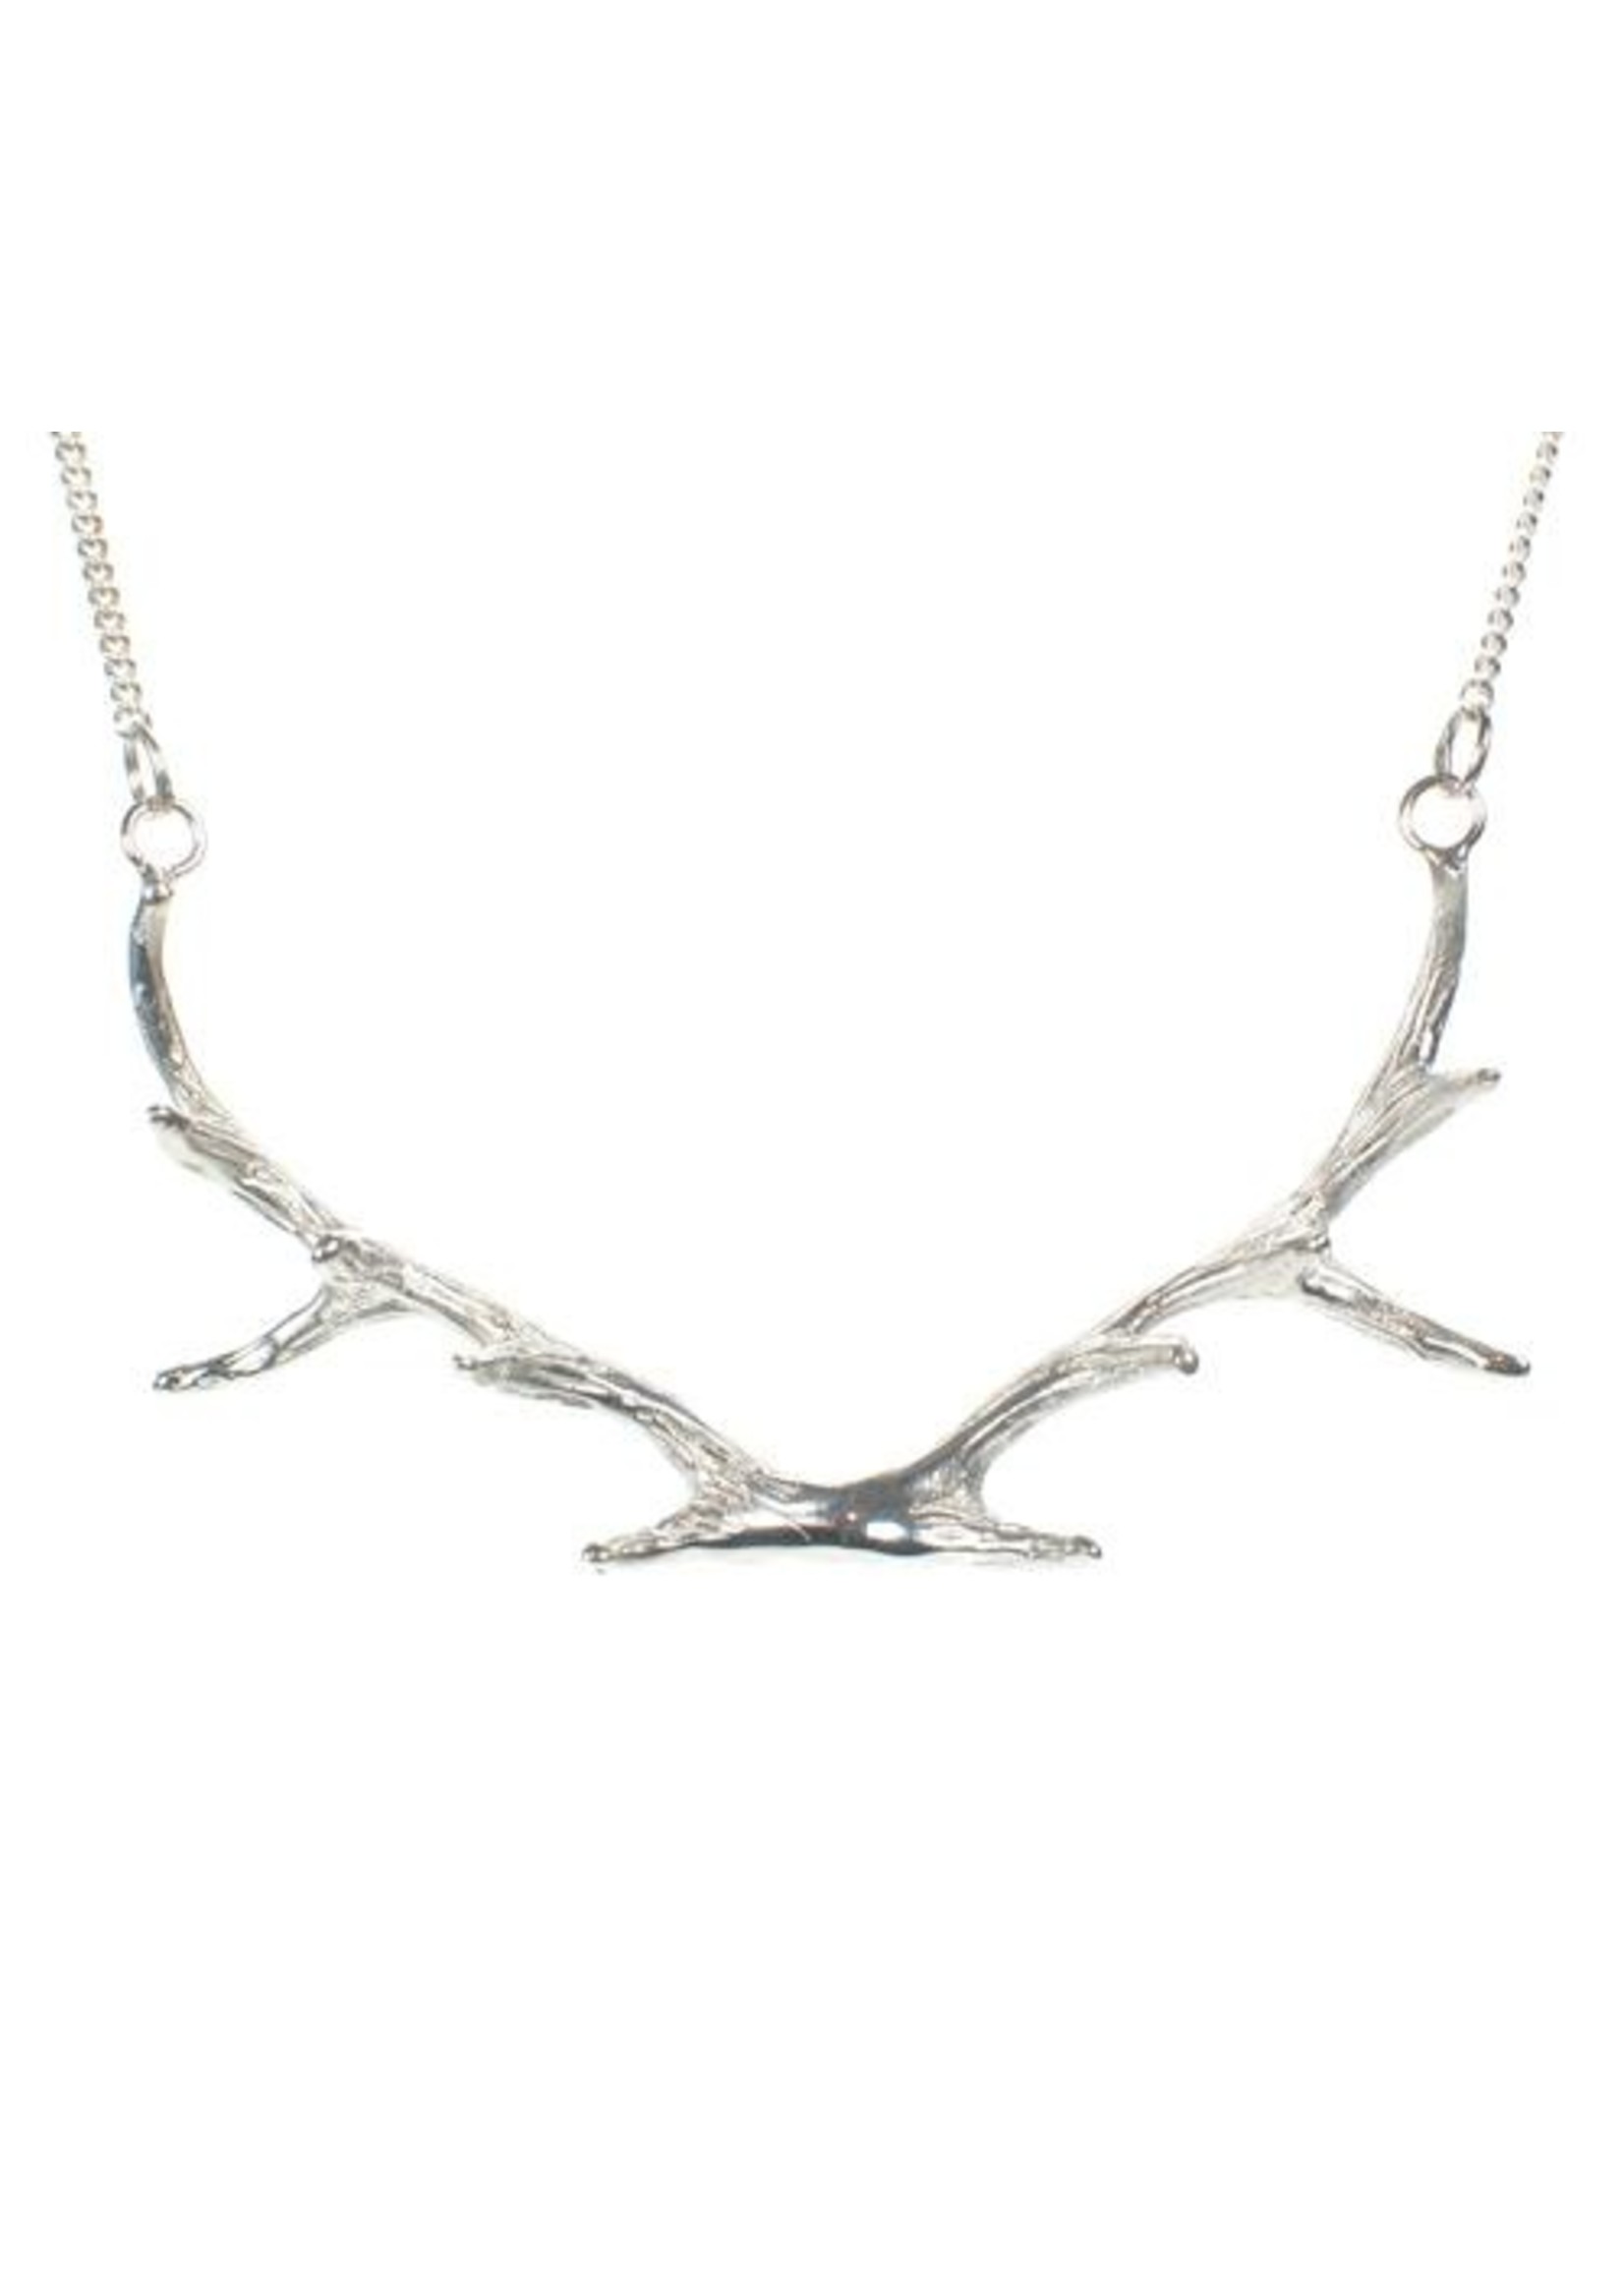 Mimi & Marge 147RP629-LARGE ANTLER NECKLACE - STERLING SILVER